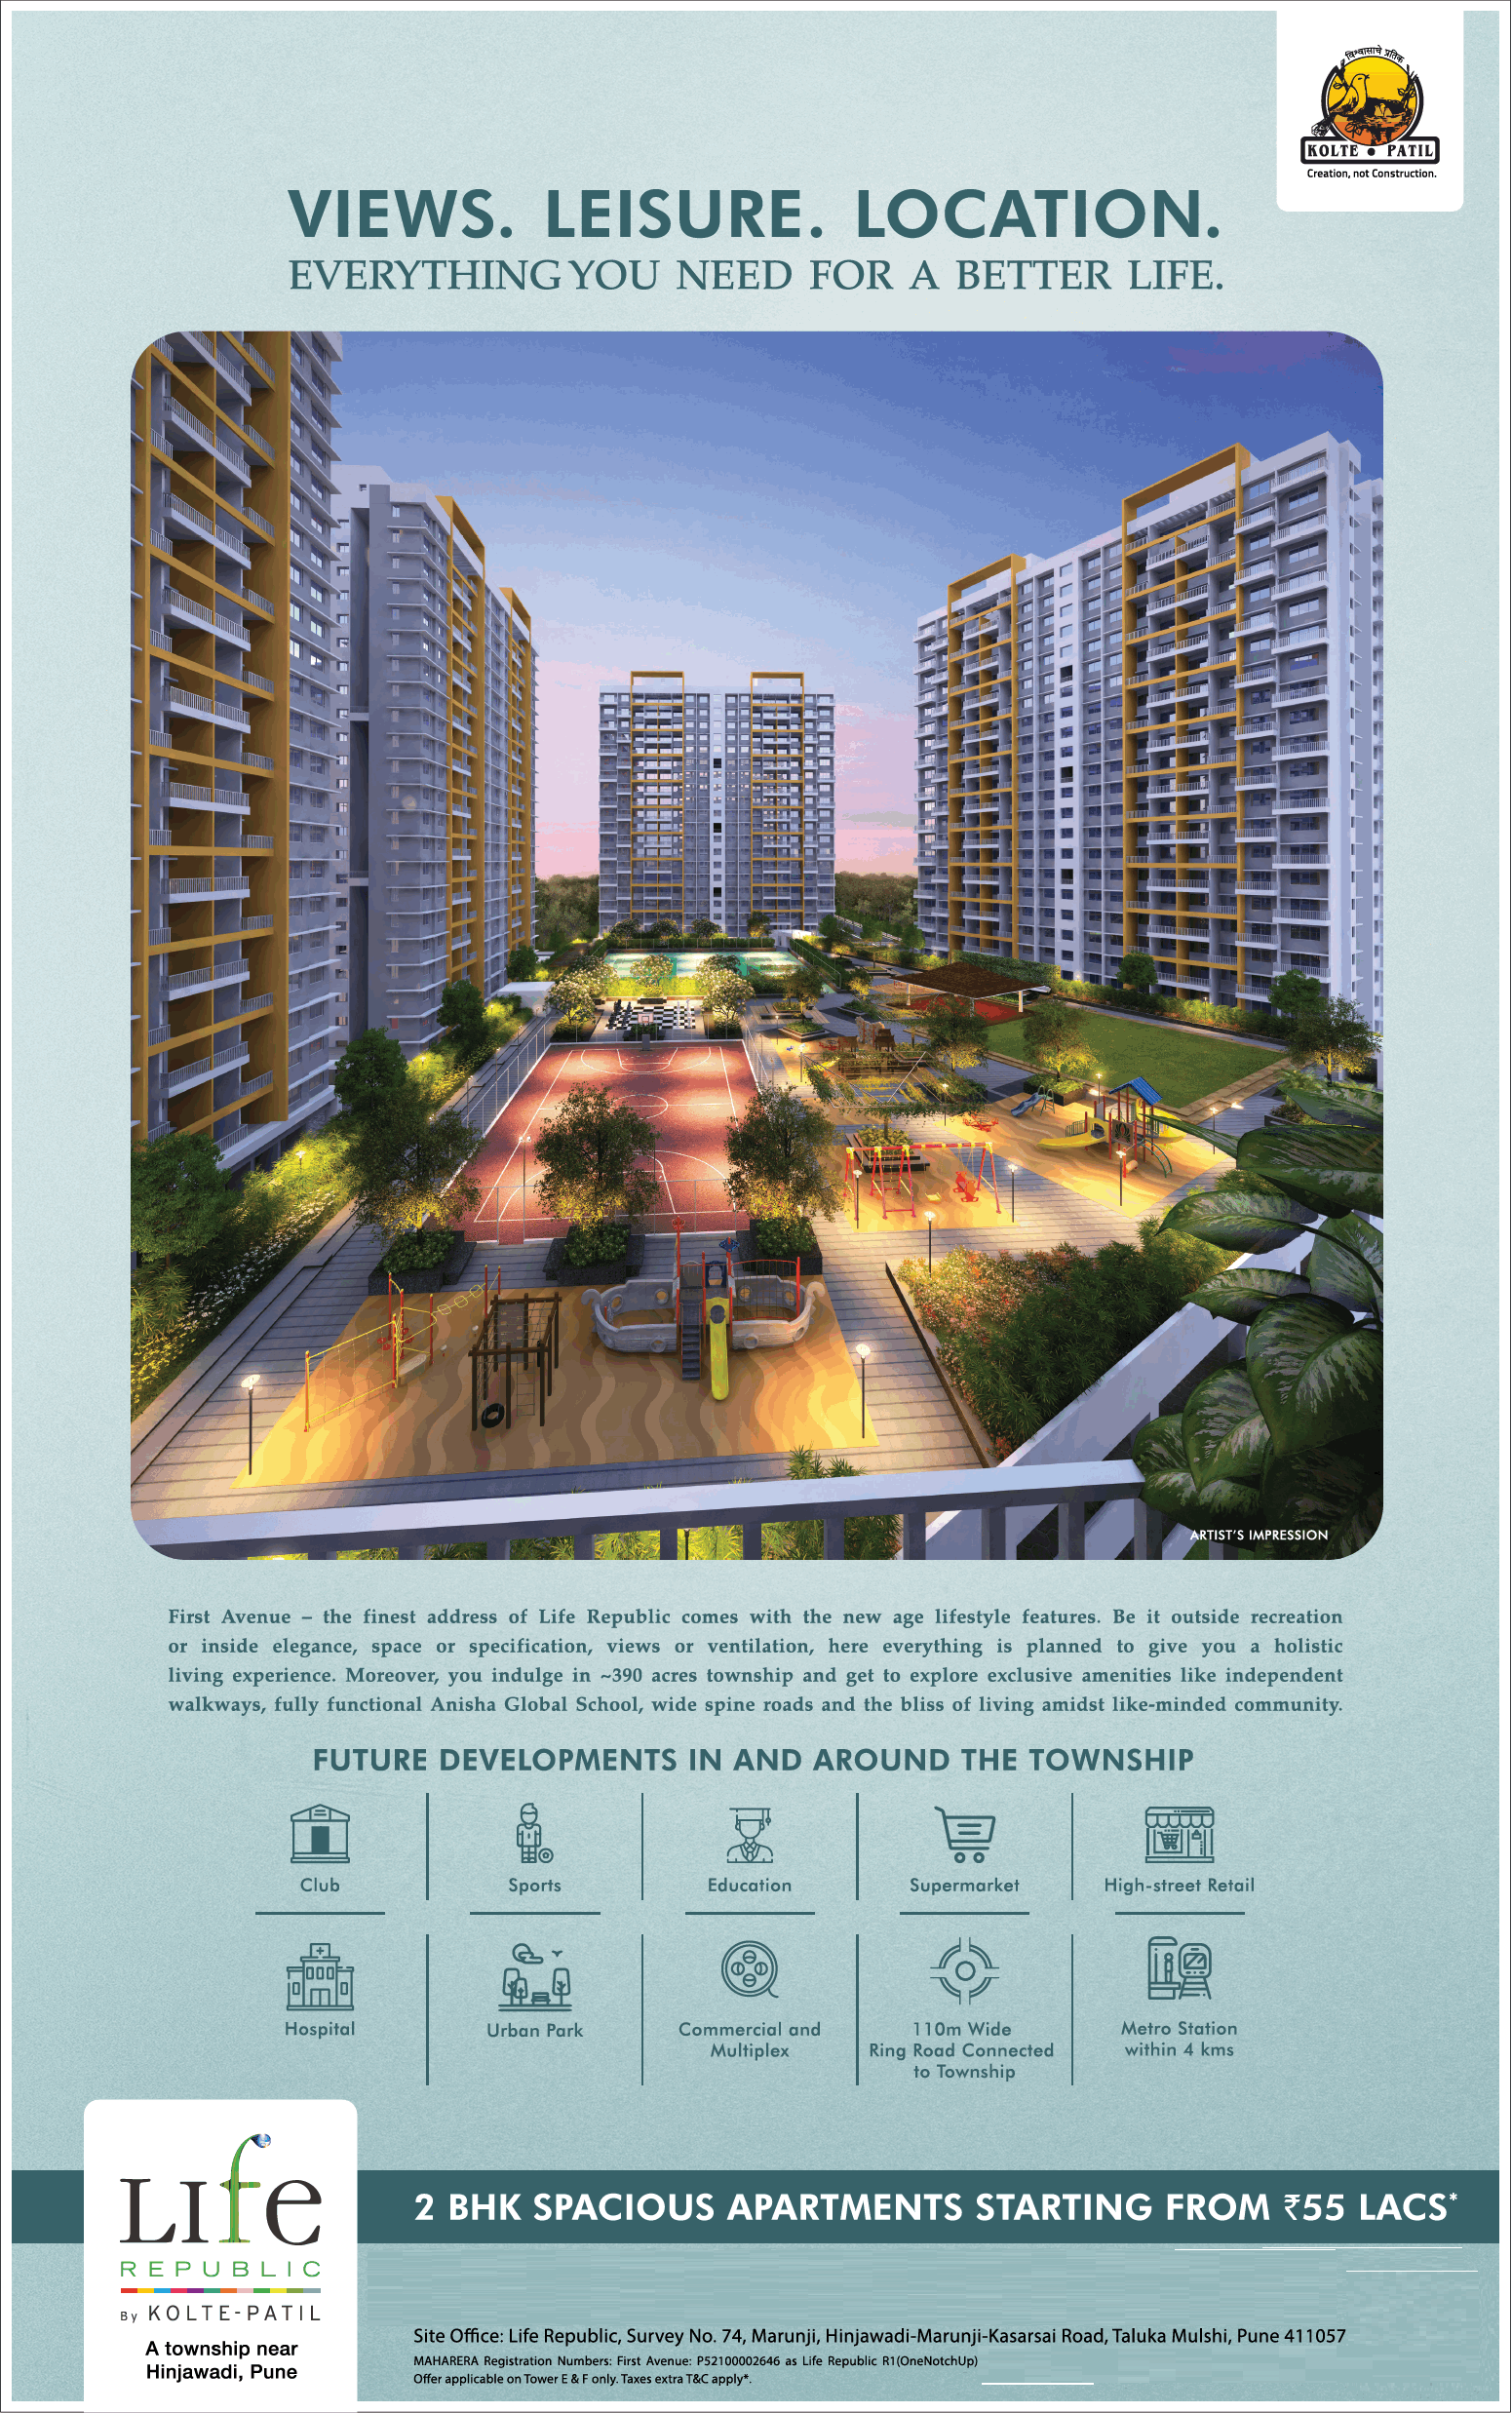 2 BHK spacious apartment starting from Rs 55 Lakh at Kolte Patil Life Republic in Pune Update